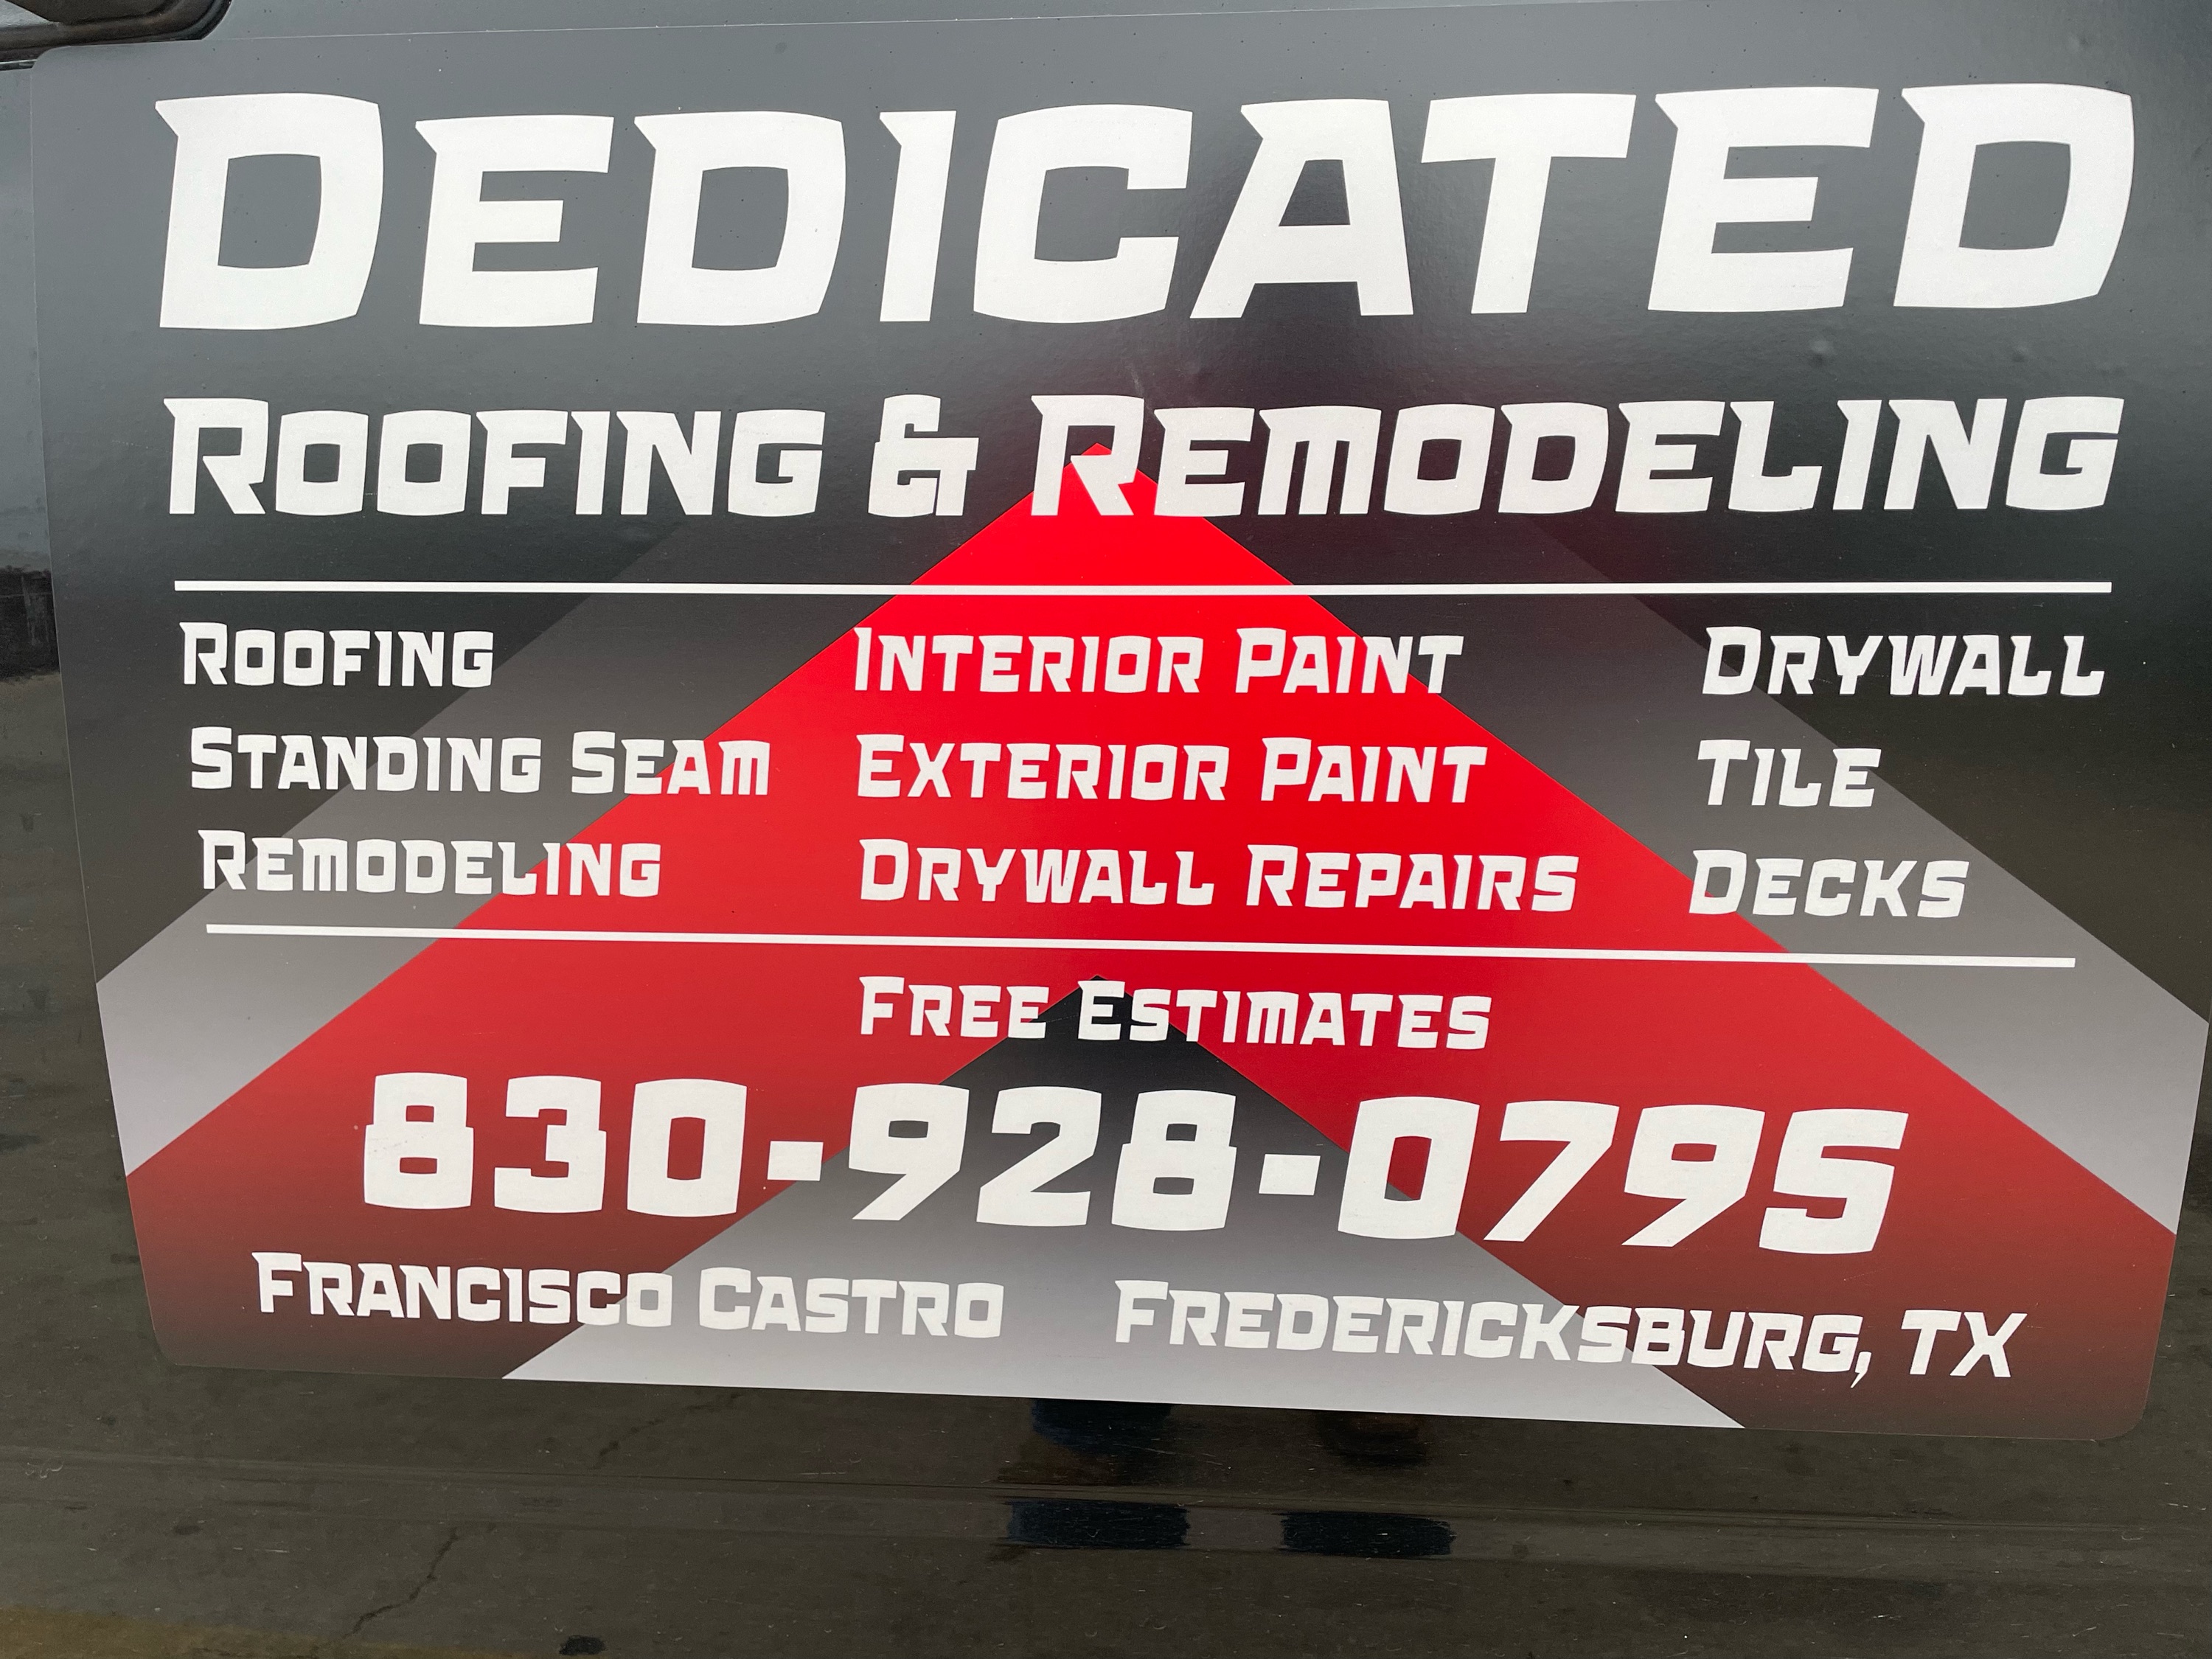 Dedicated Roofing and Remodeling Logo